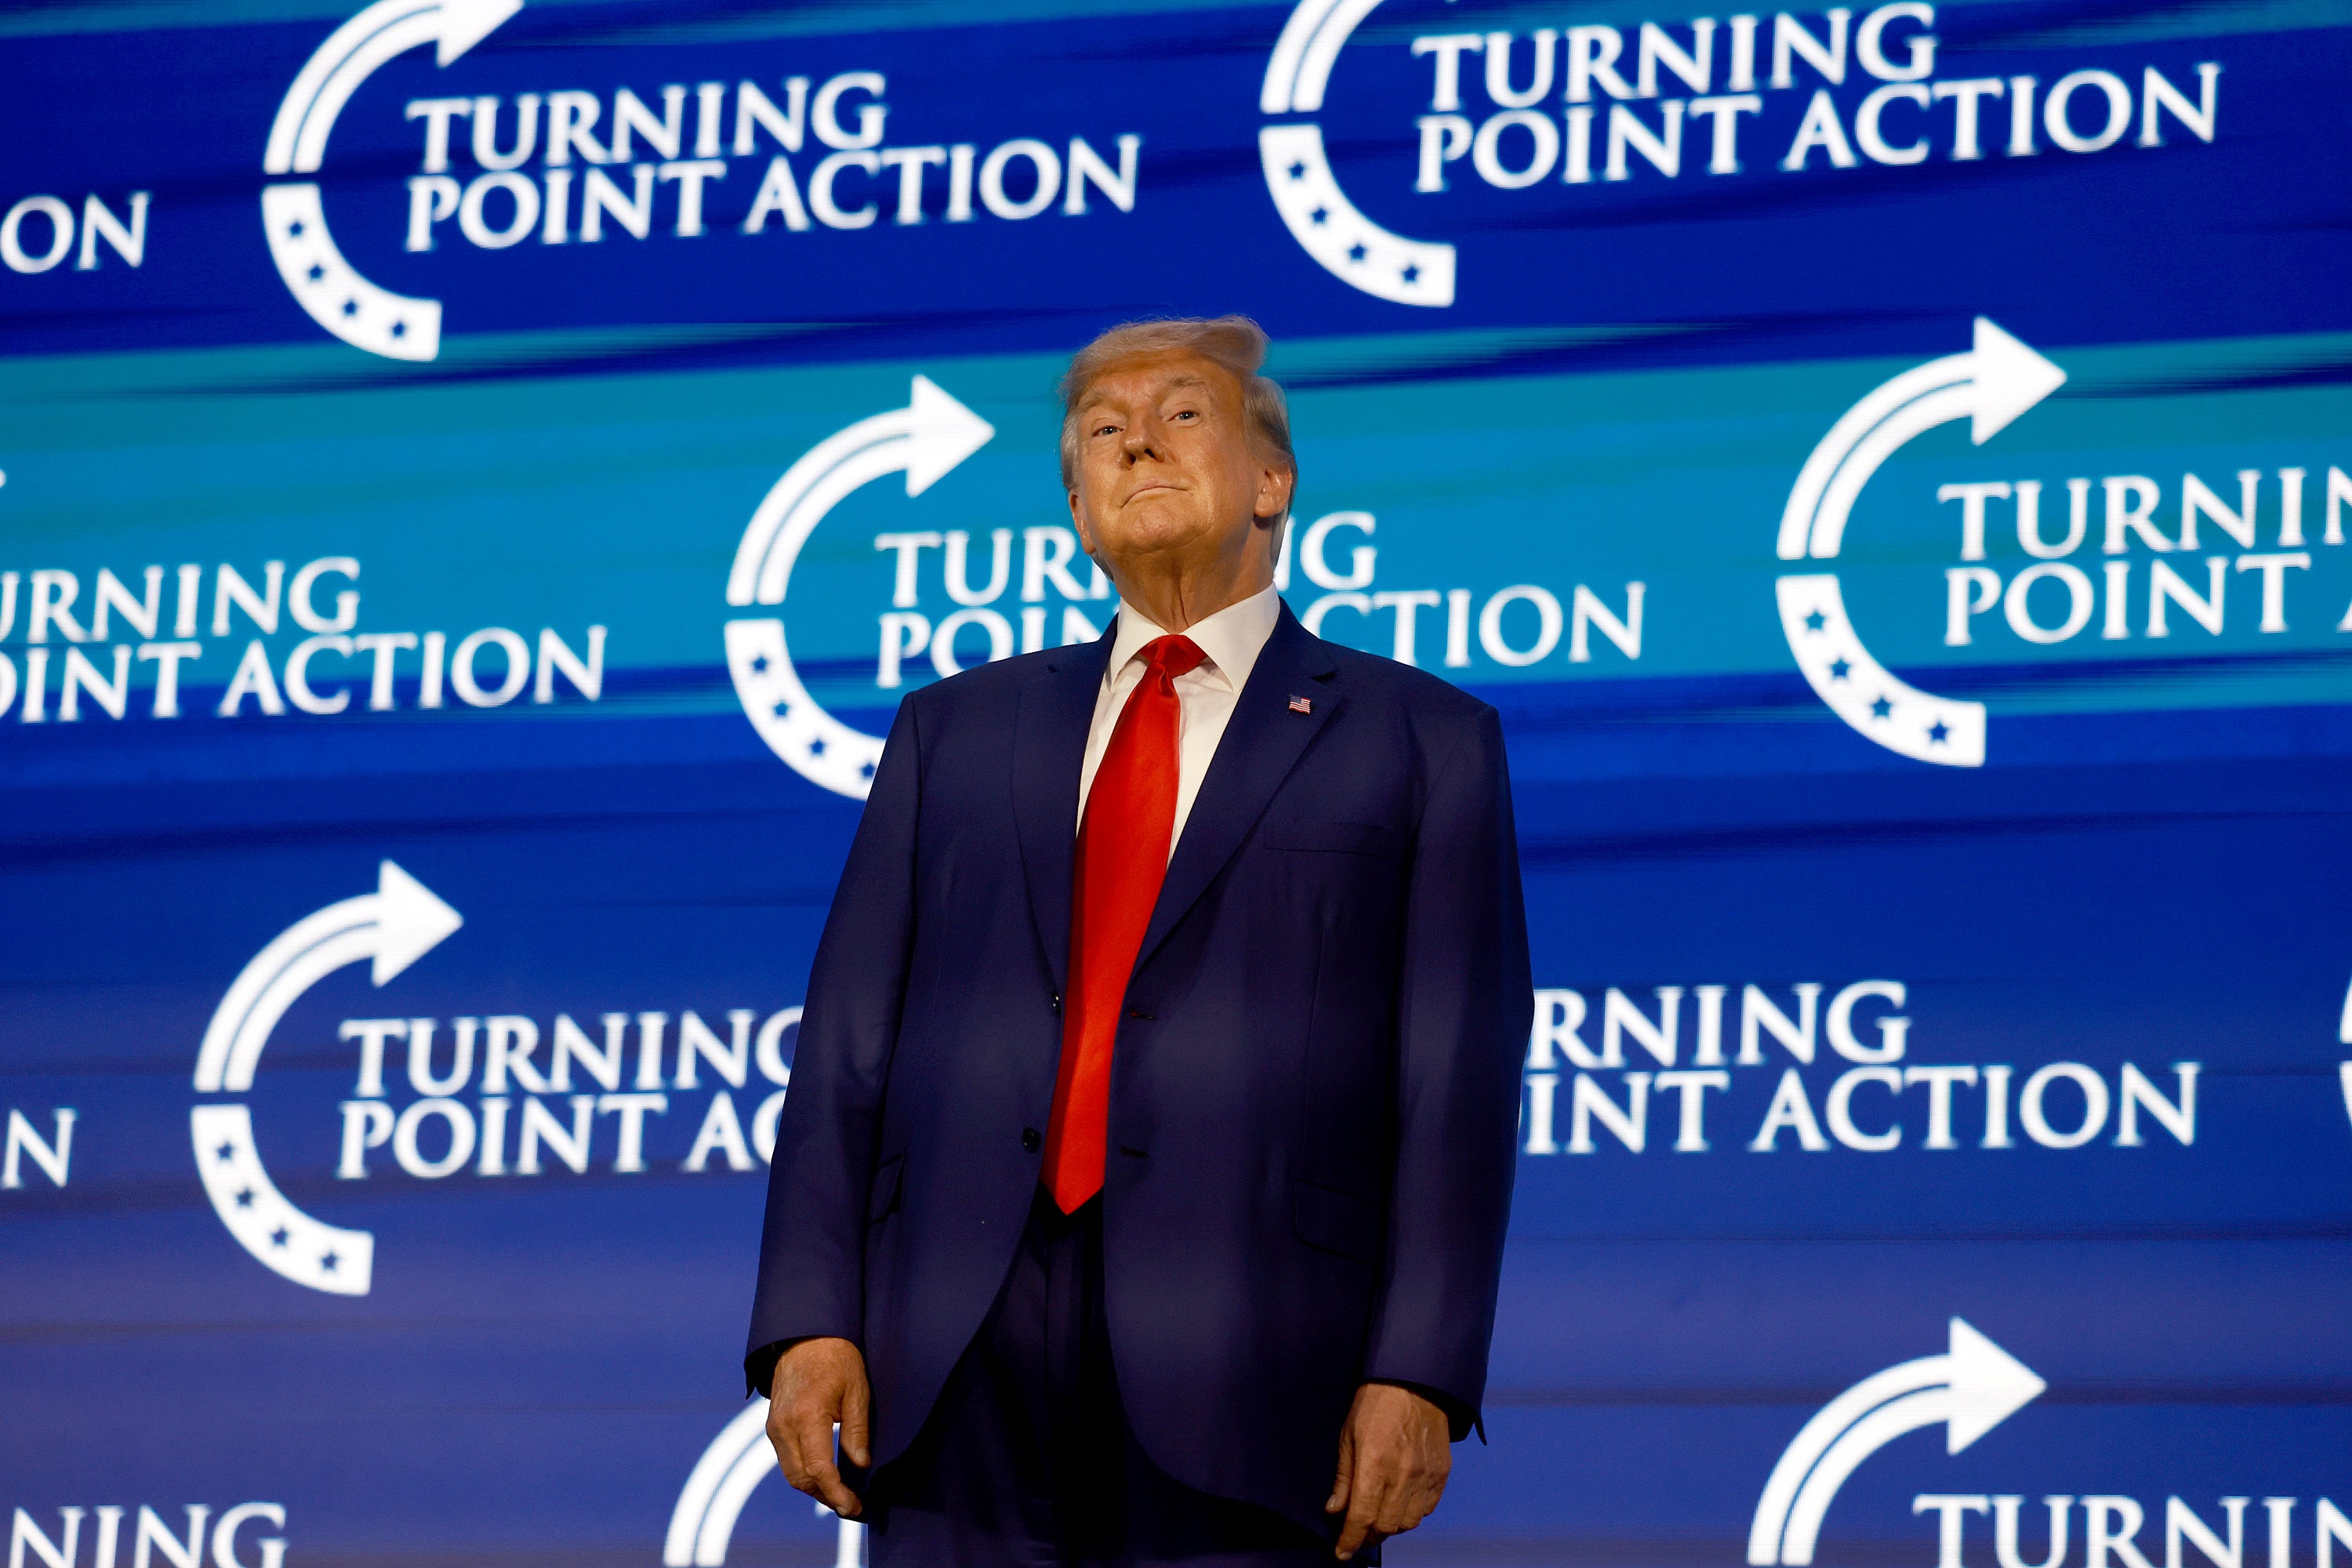 Former US President Donald Trump arrives on stage to speak at the Turning Point Action conference as he continues his 2024 presidential campaign on July 15, 2023 in West Palm Beach, Florida.